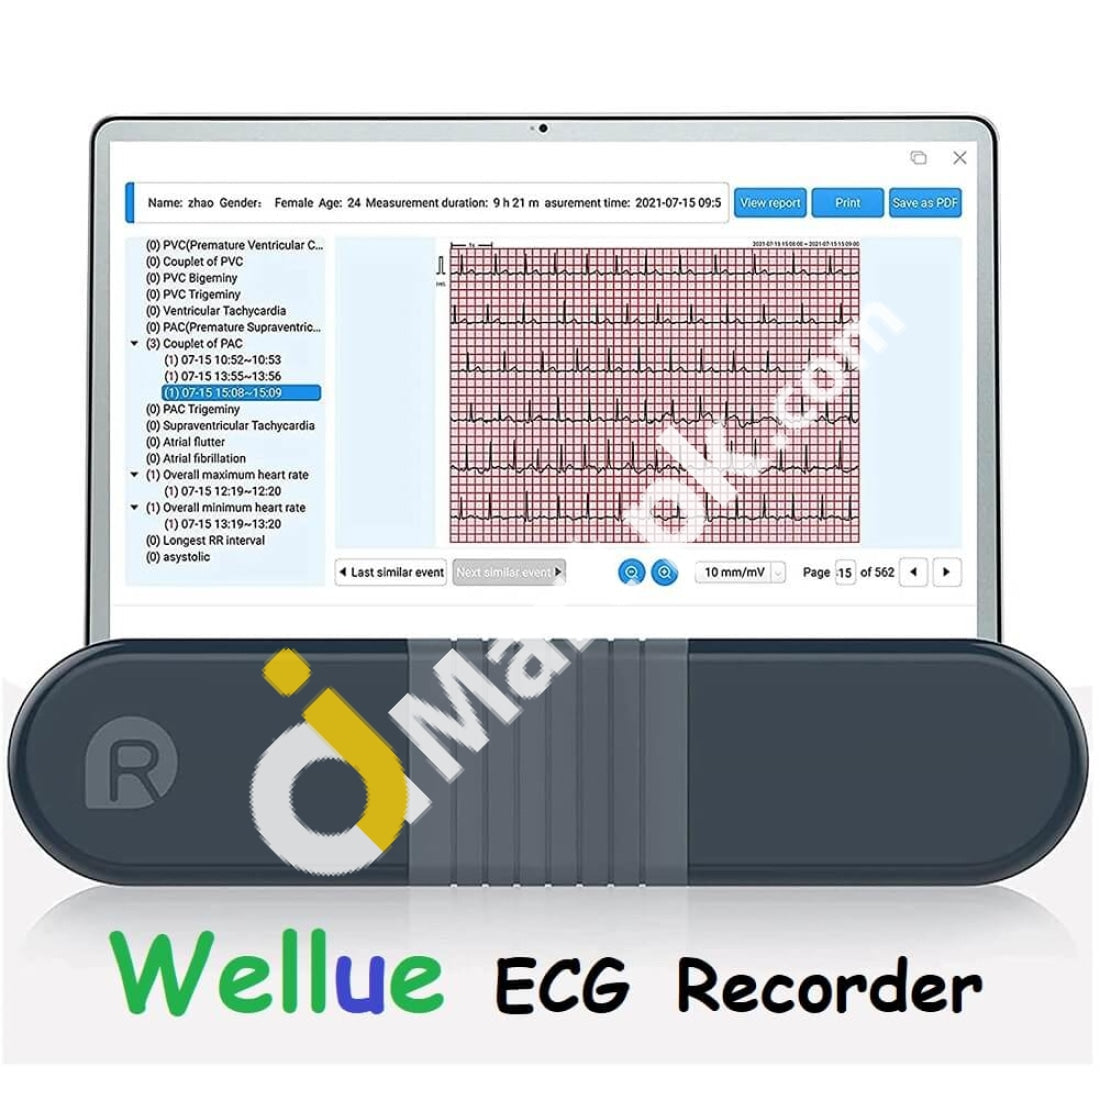 Checkme BP2 Connect Blood Pressure Monitors with AI ECG Analysis, Upper Arm BP  Machine Cuff Kit and EKG Heart Monitor, Supports Wifi & Bluetooth 